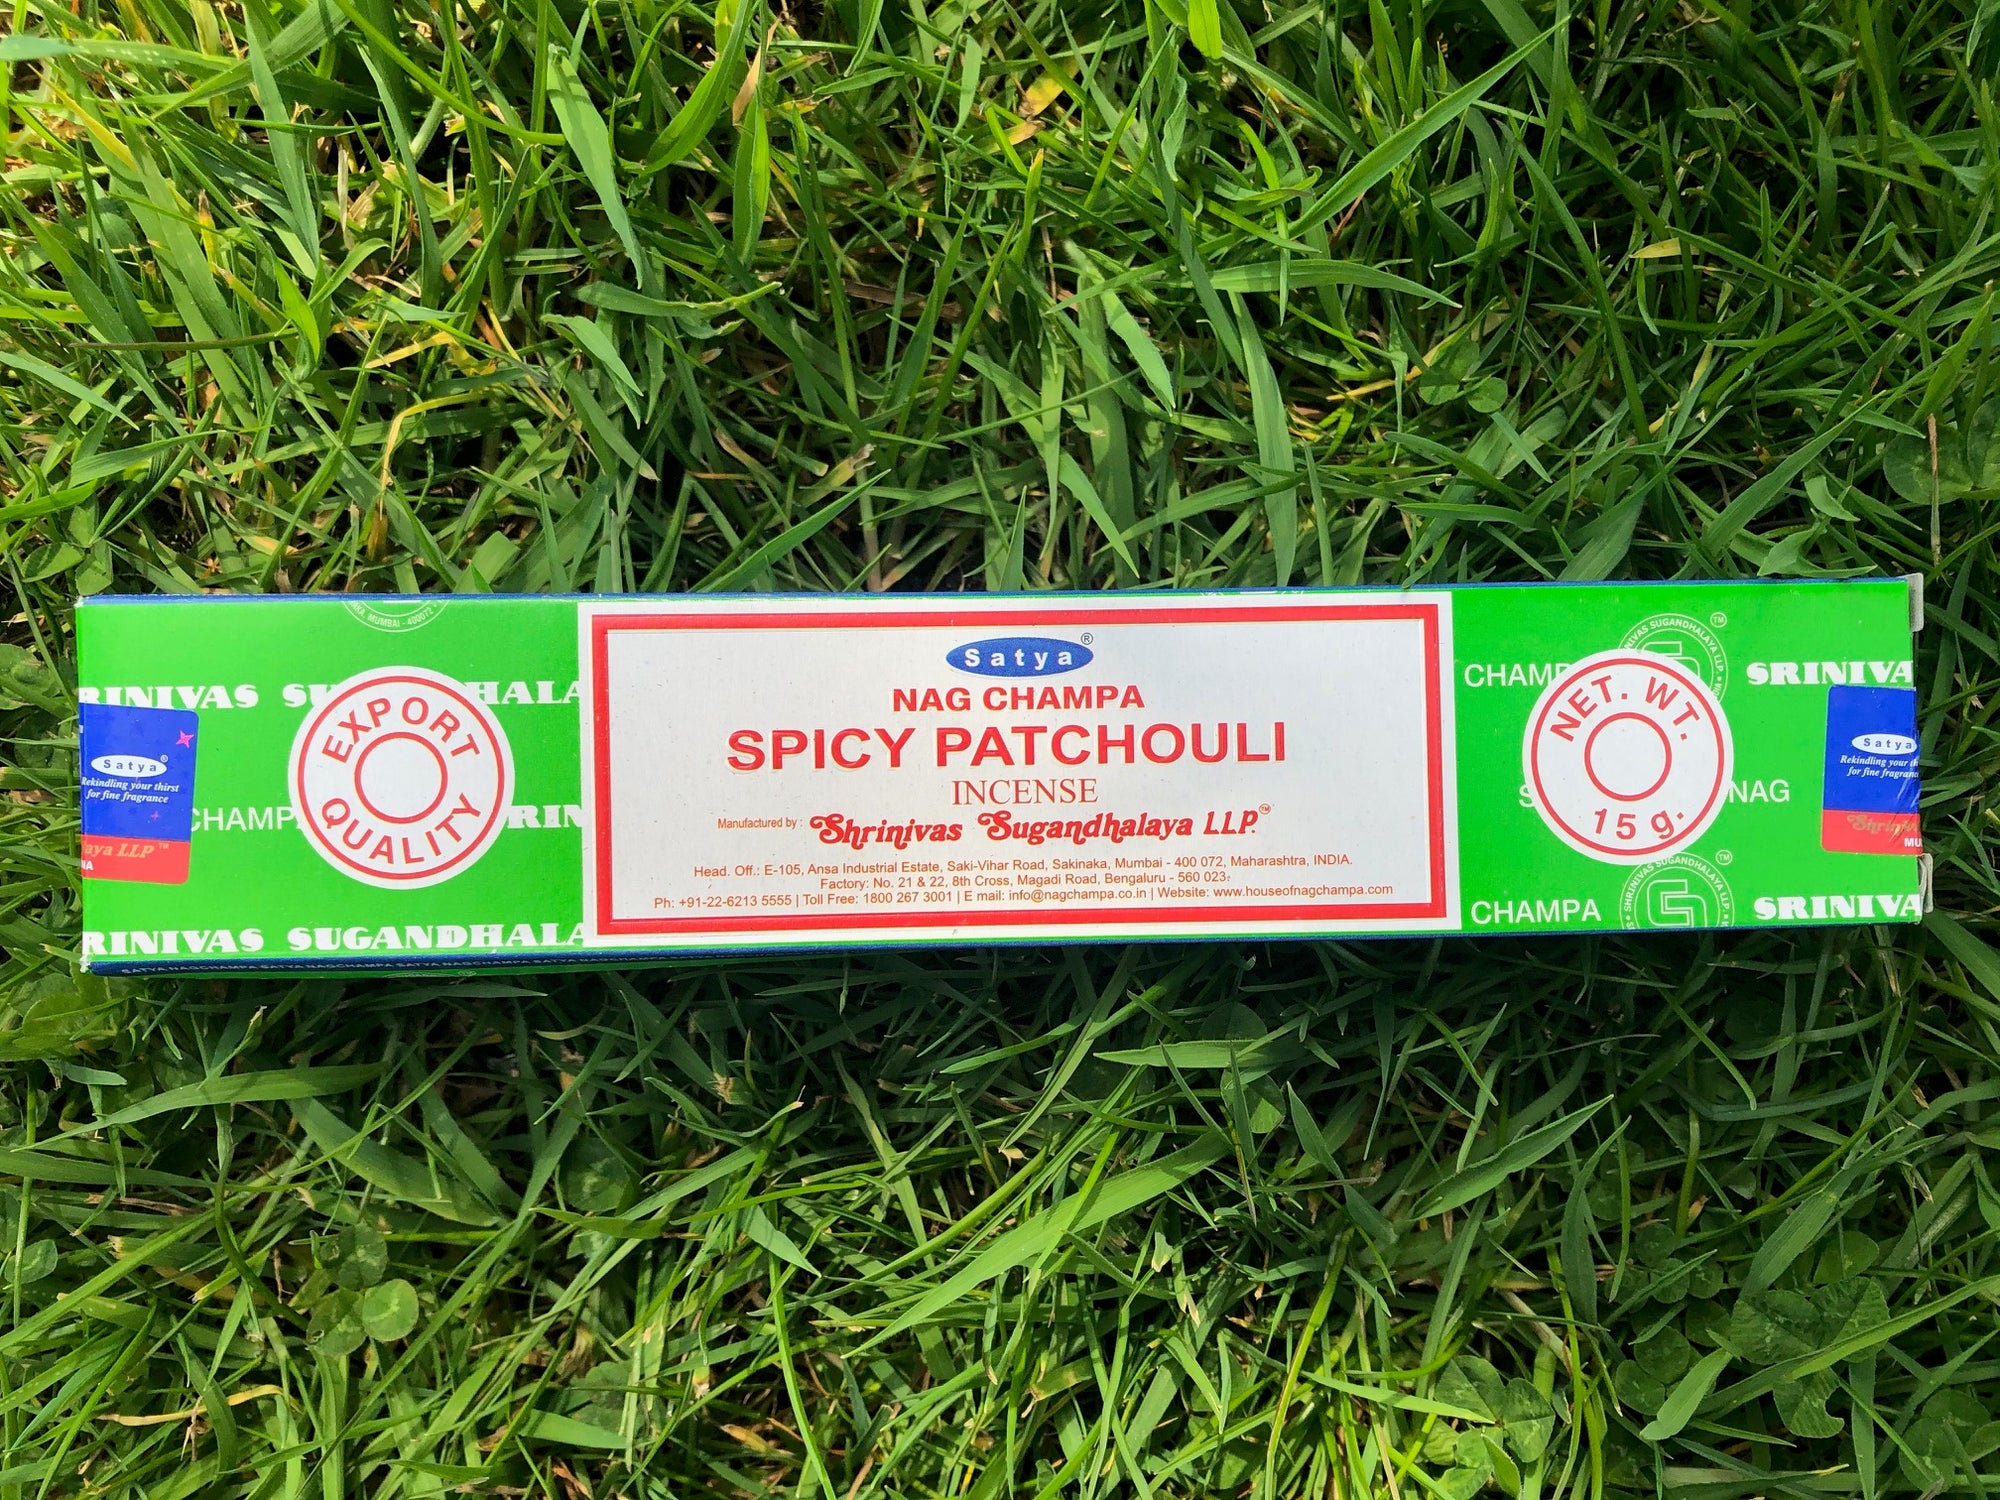 Spicy Patchouli Incense